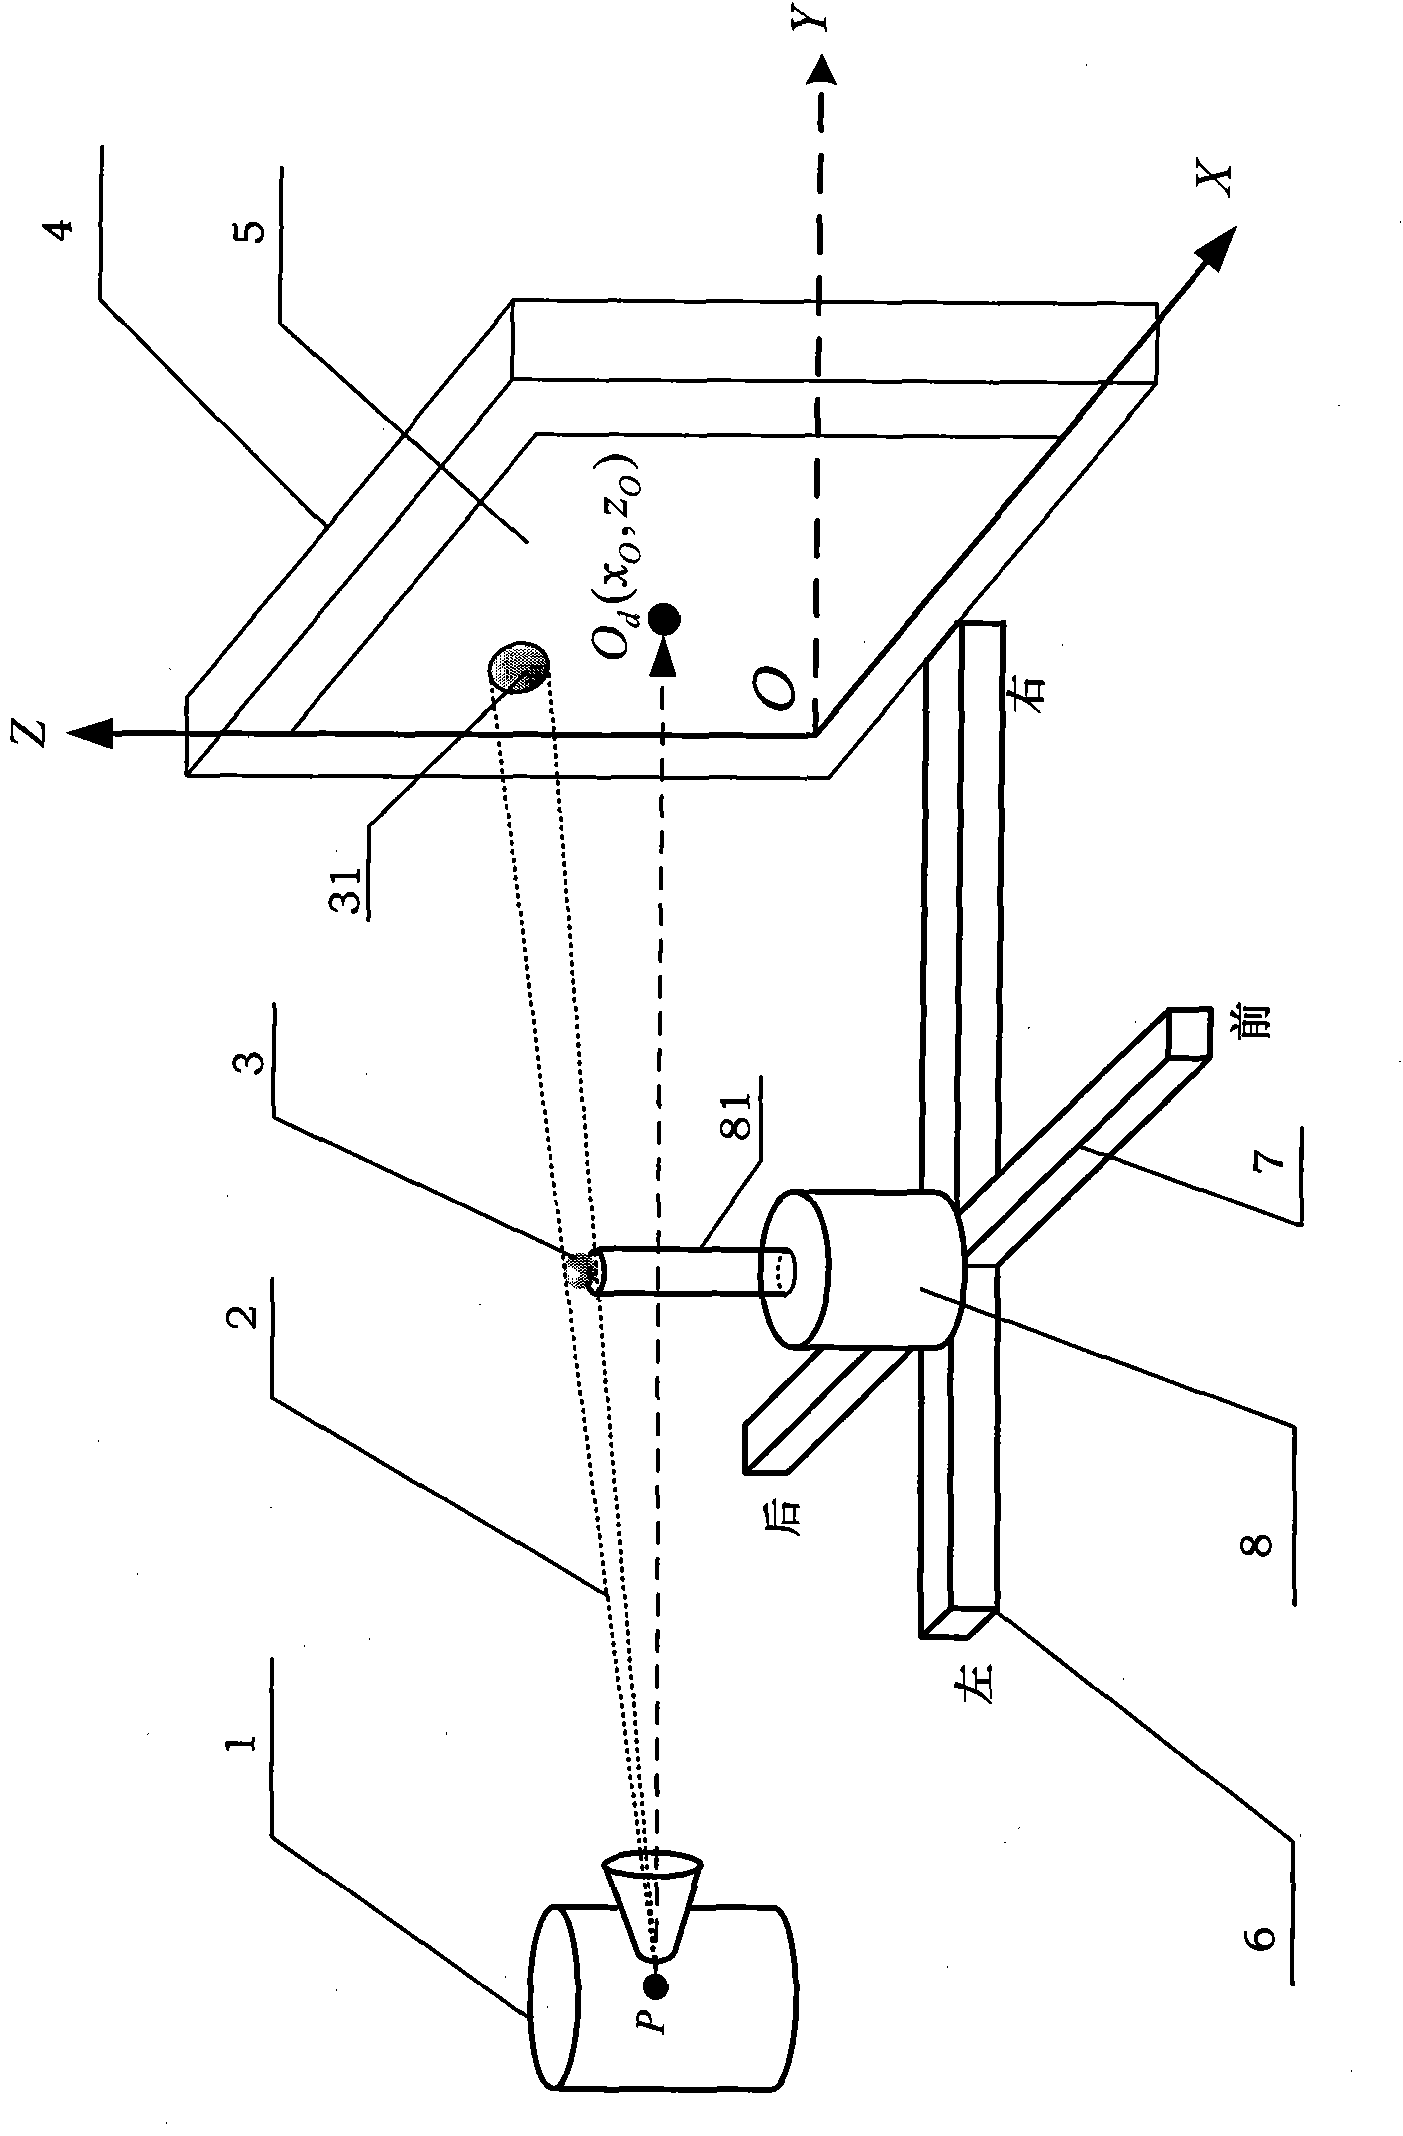 Mobile assembly for pencil beam XCT (X-ray Computed Tomography) system and a method for carrying out image reconstruction and coordinate system origin calibration by using same